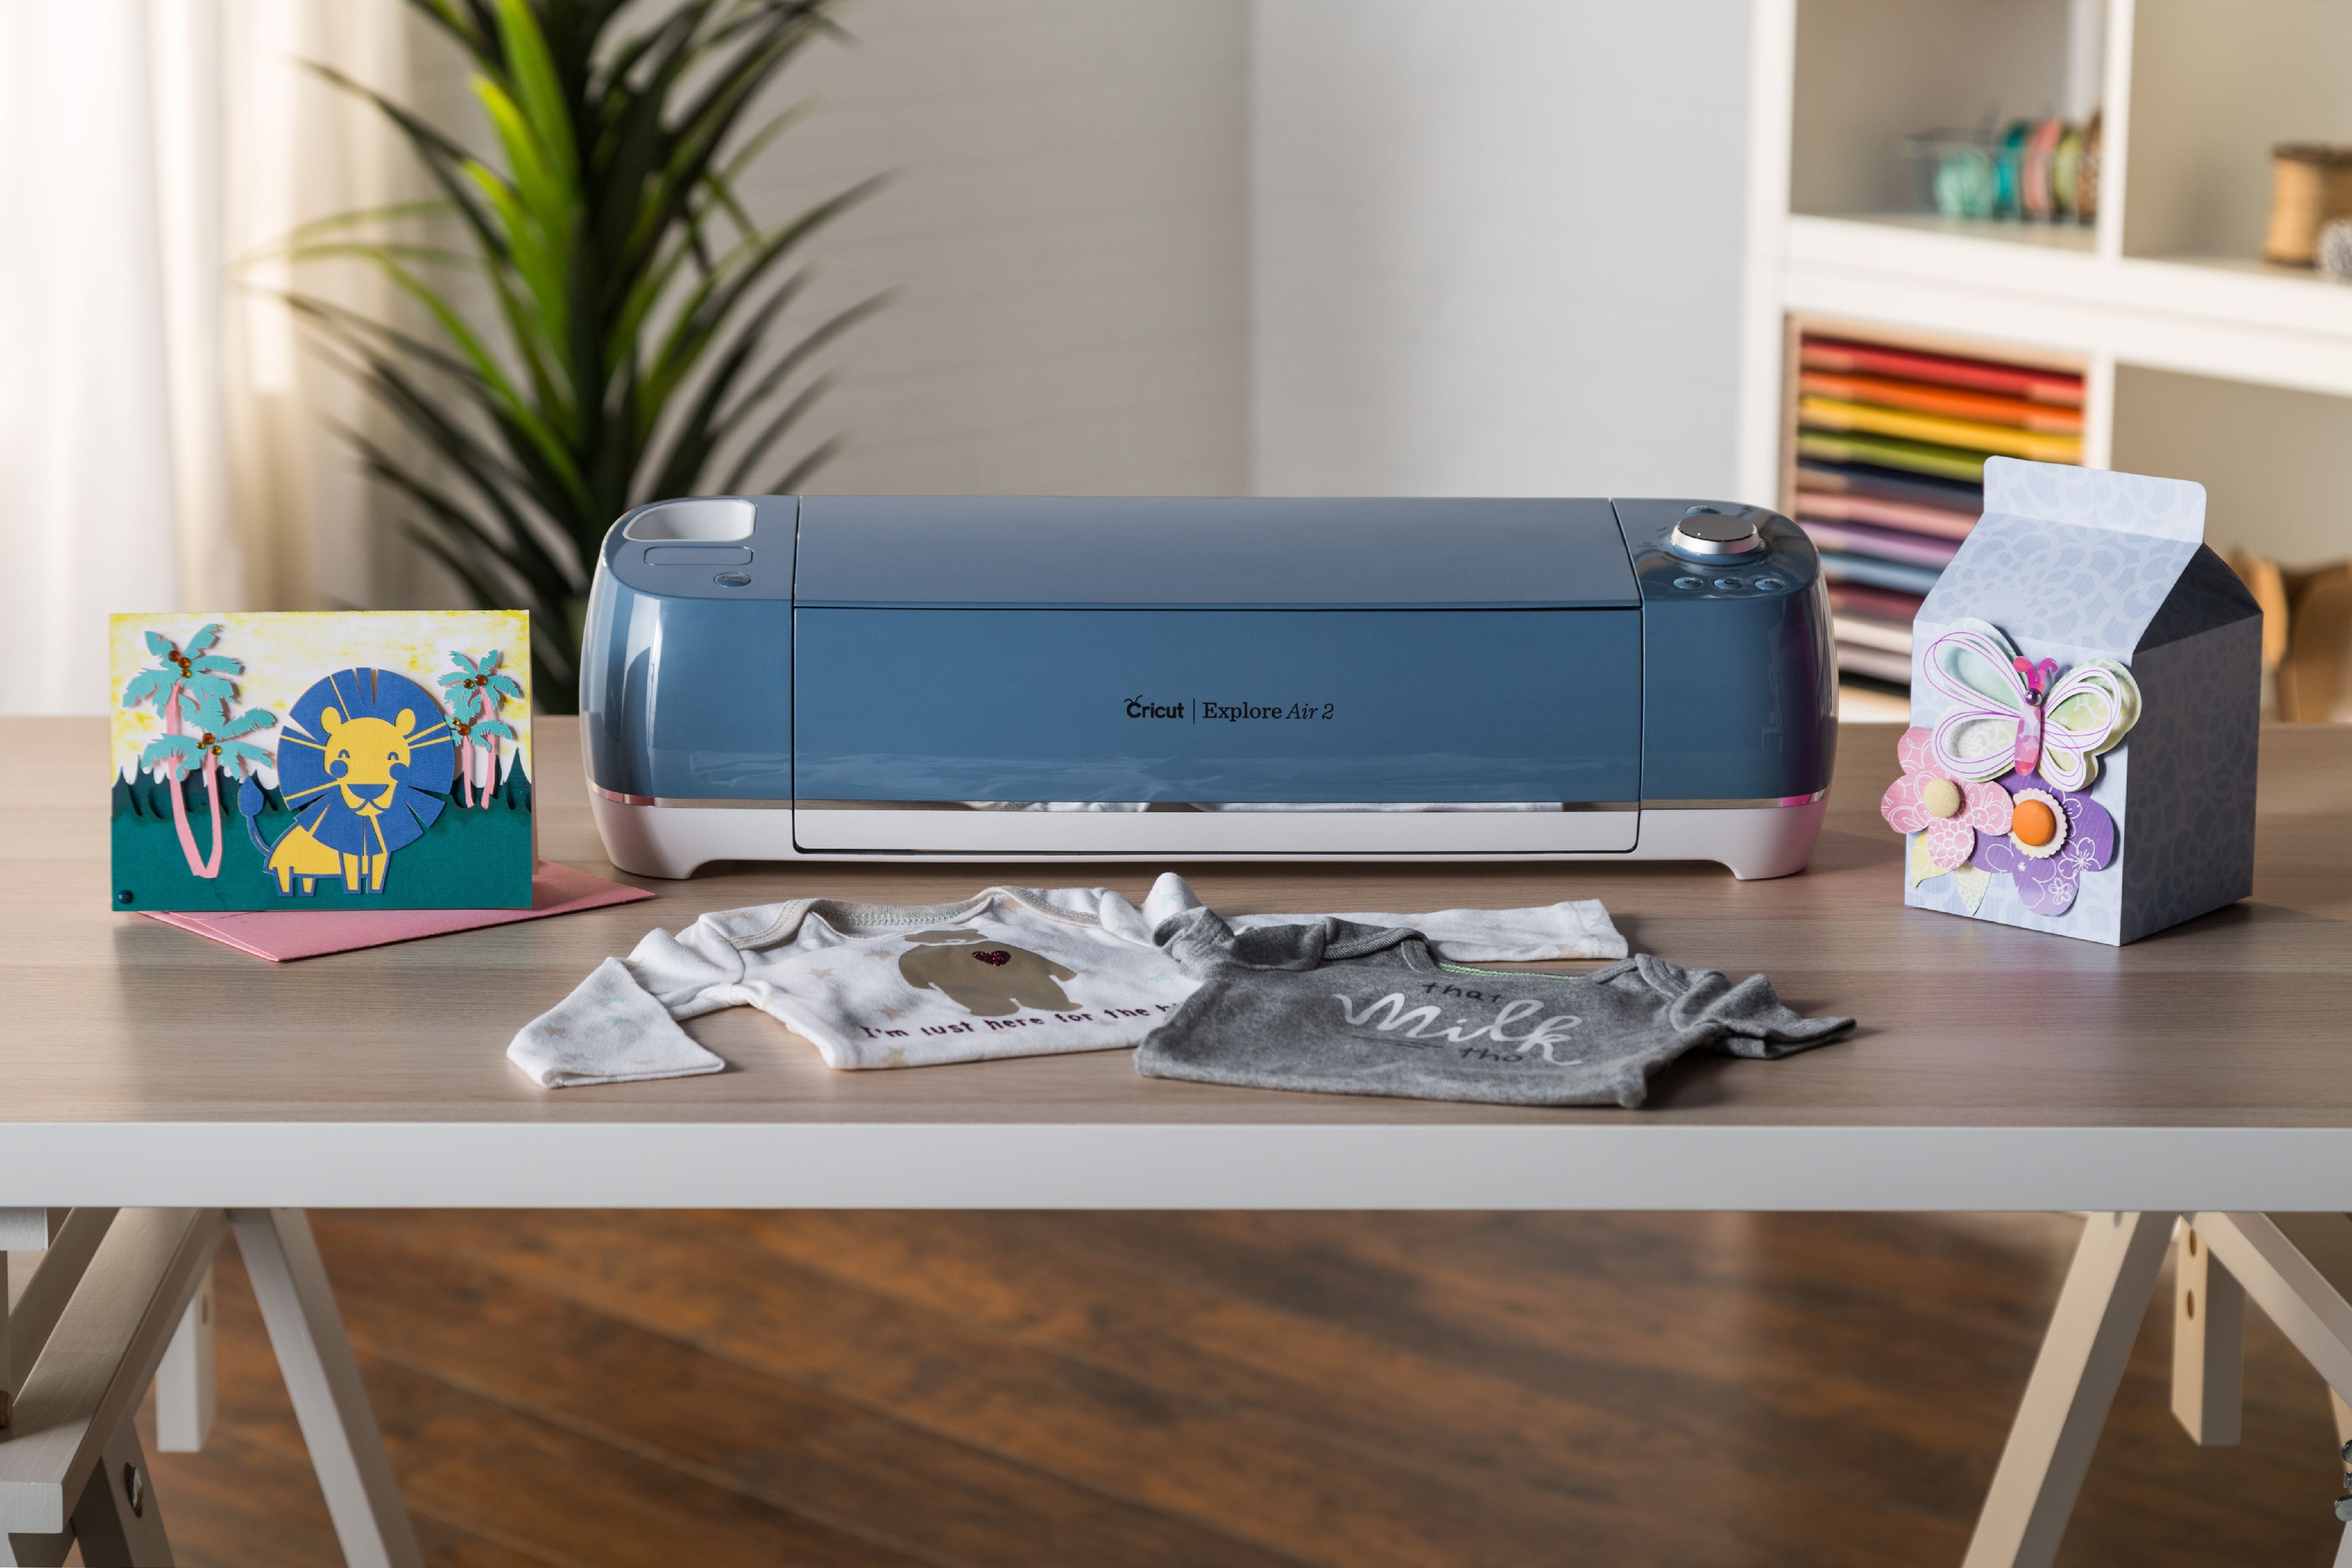 Cricut's Explore Air 2's multiple cutting modes give you even mor...